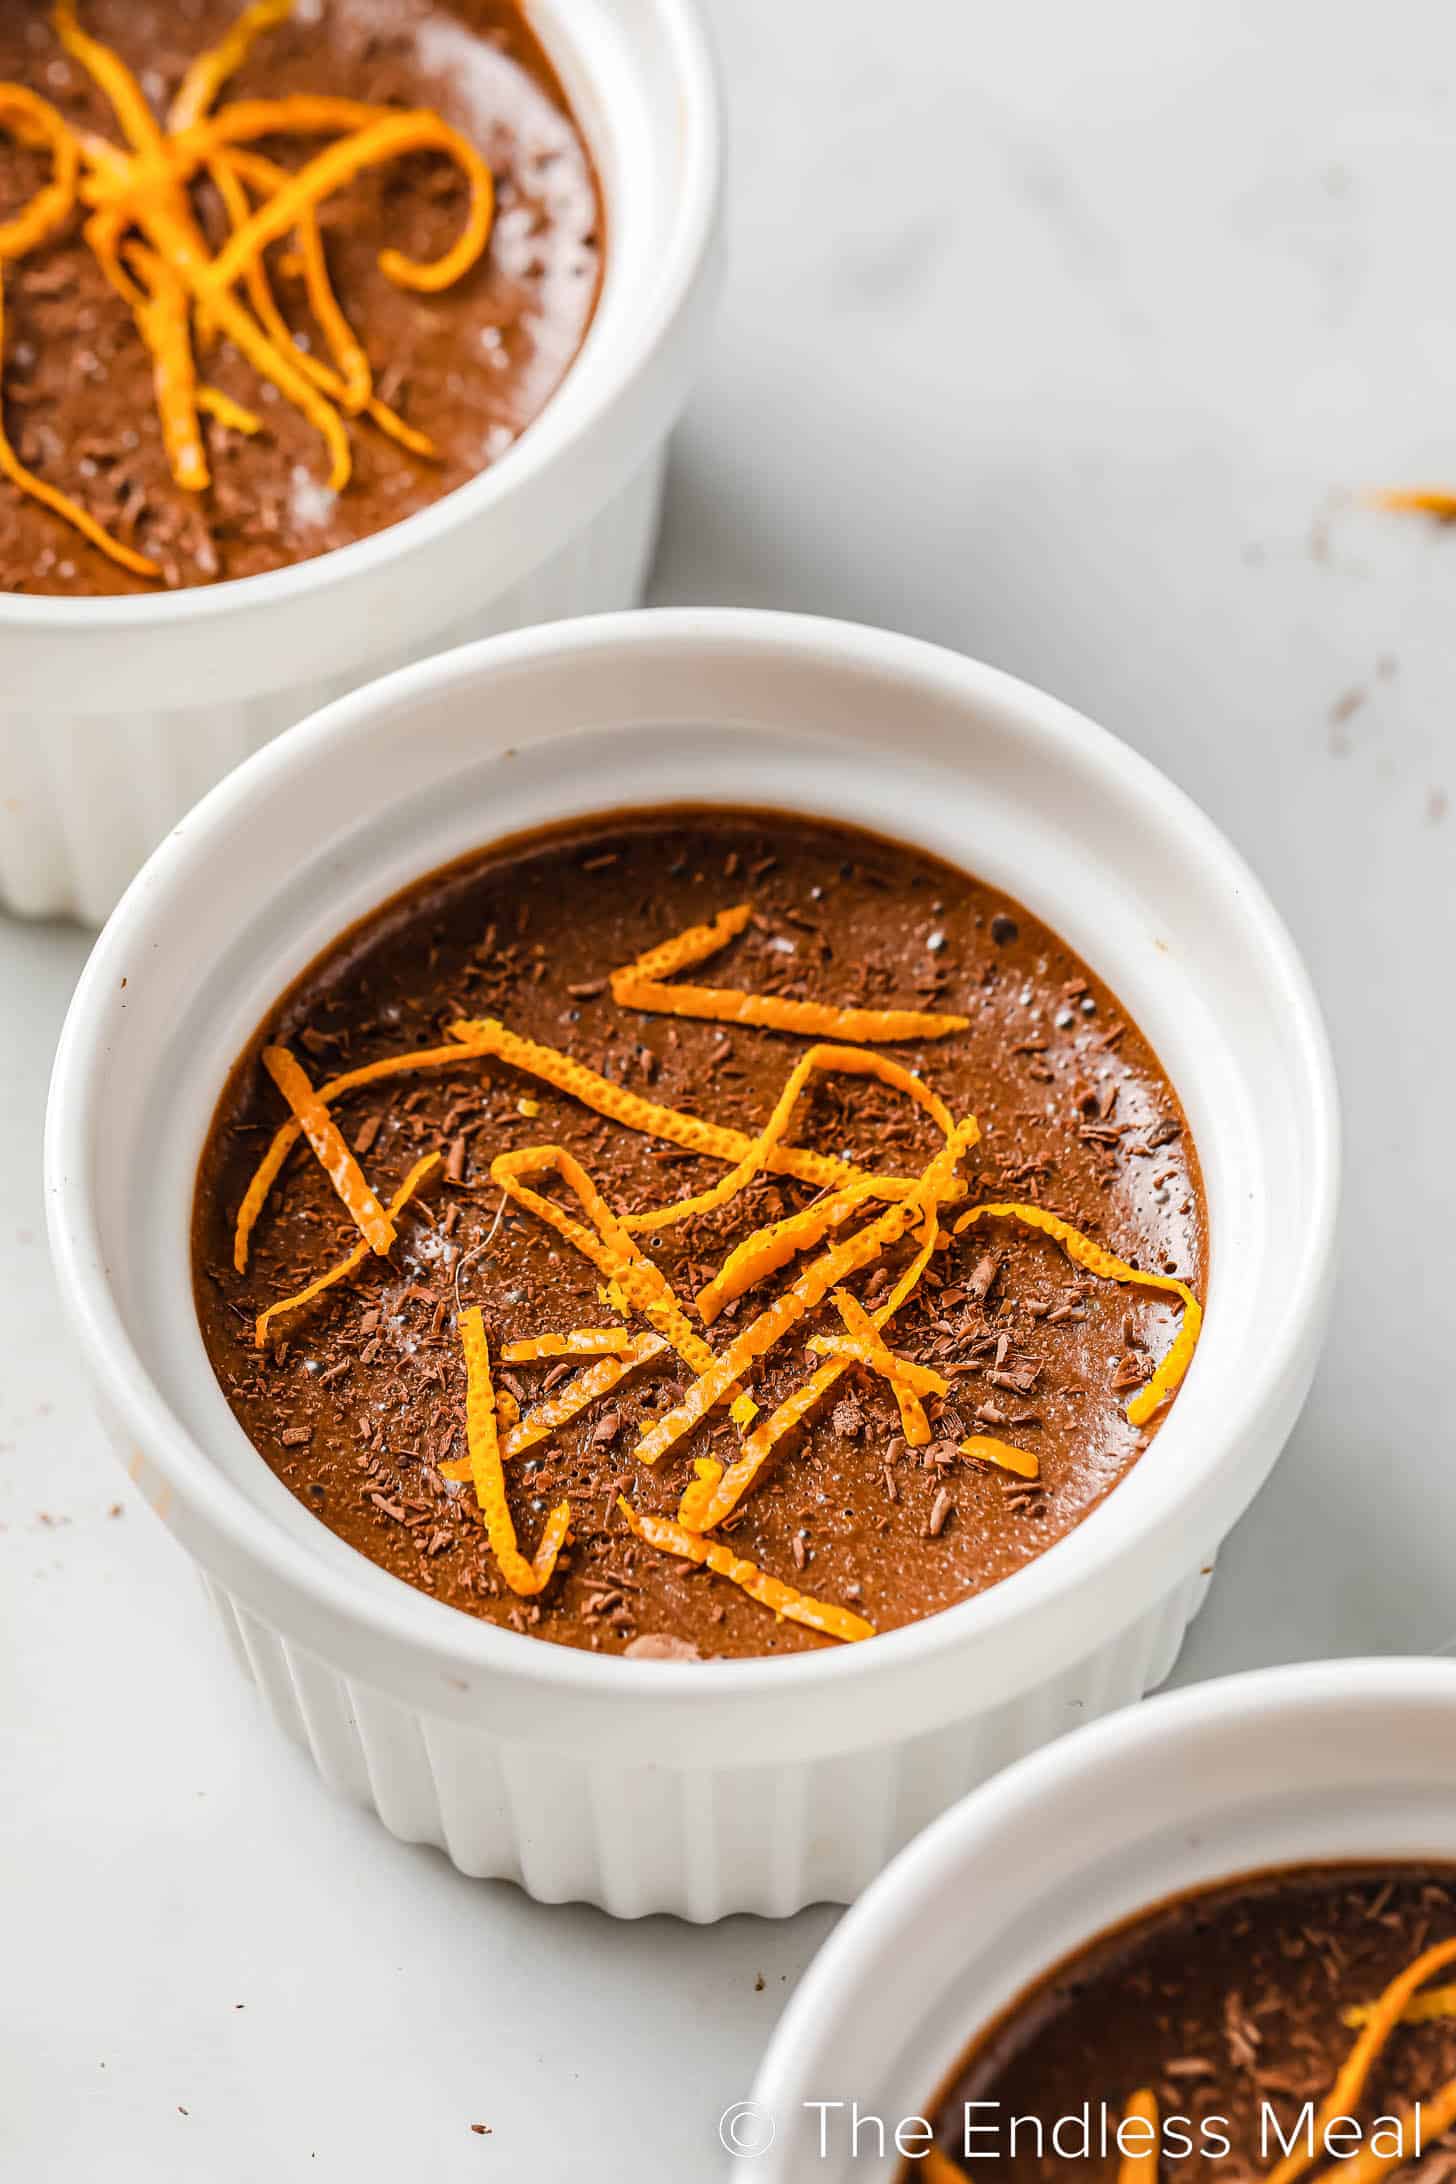 Julia Child's Chocolate Mousse in a white dish with candied orange peel